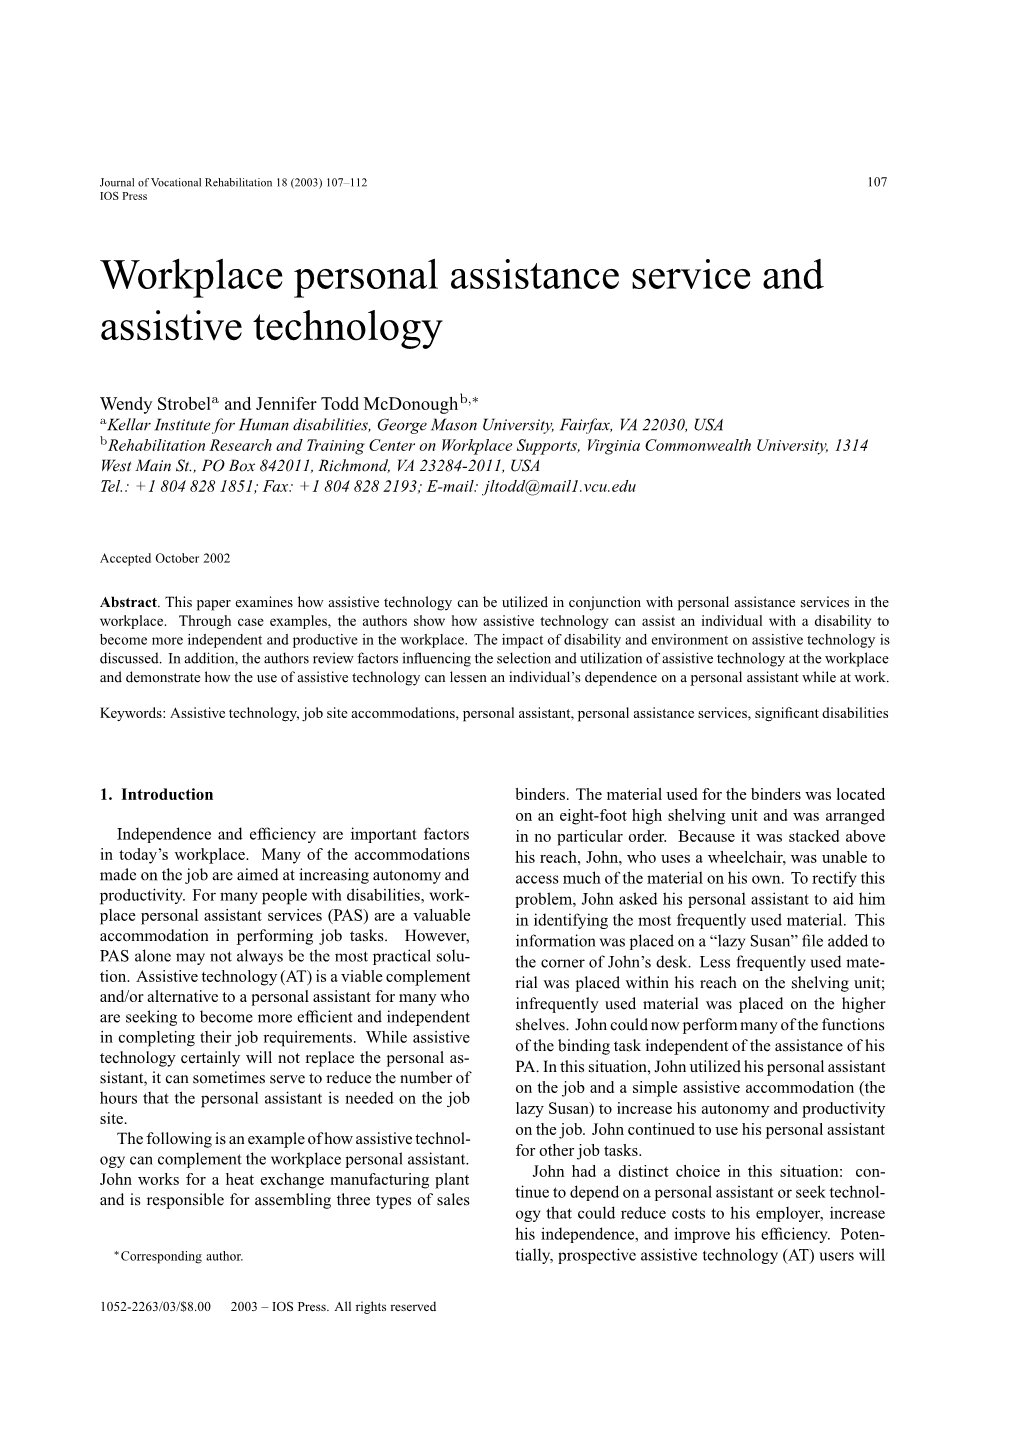 Workplace Personal Assistance Service and Assistive Technology